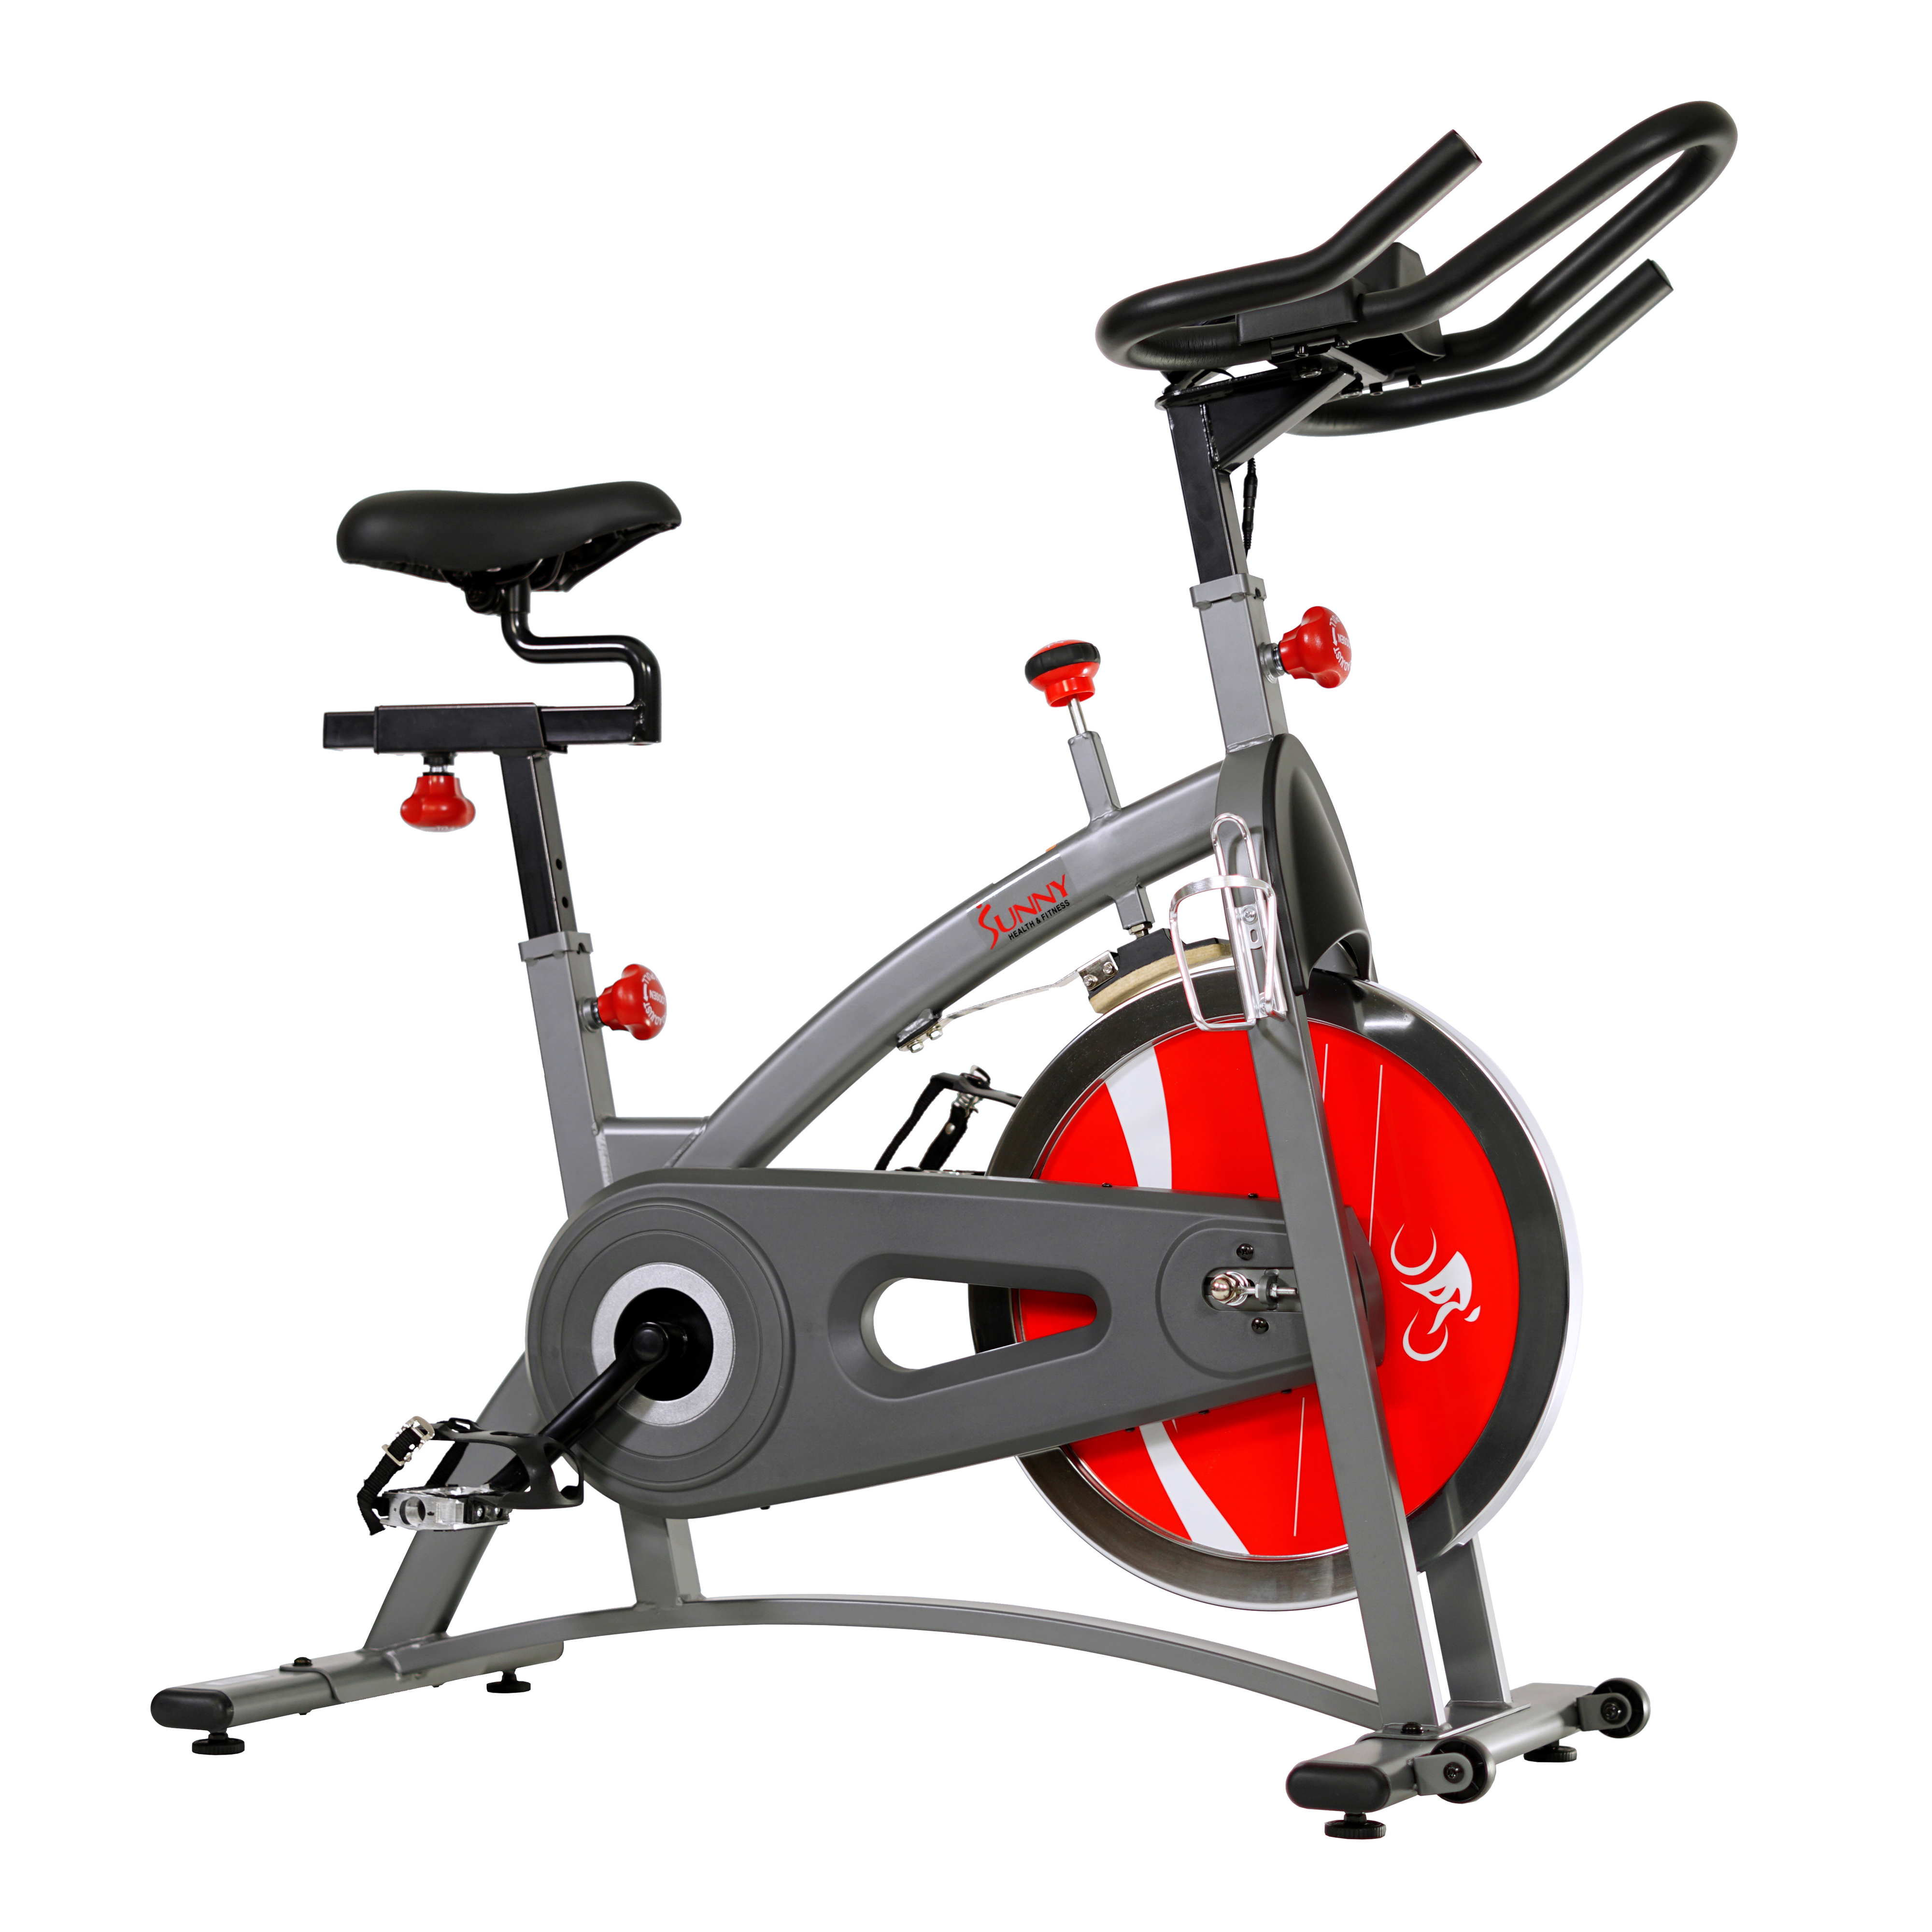 Sunny Health & Fitness SF-B1423 Belt Drive Indoor Cycling Bike Exercise Bike w/ LCD Monitor - image 1 of 7